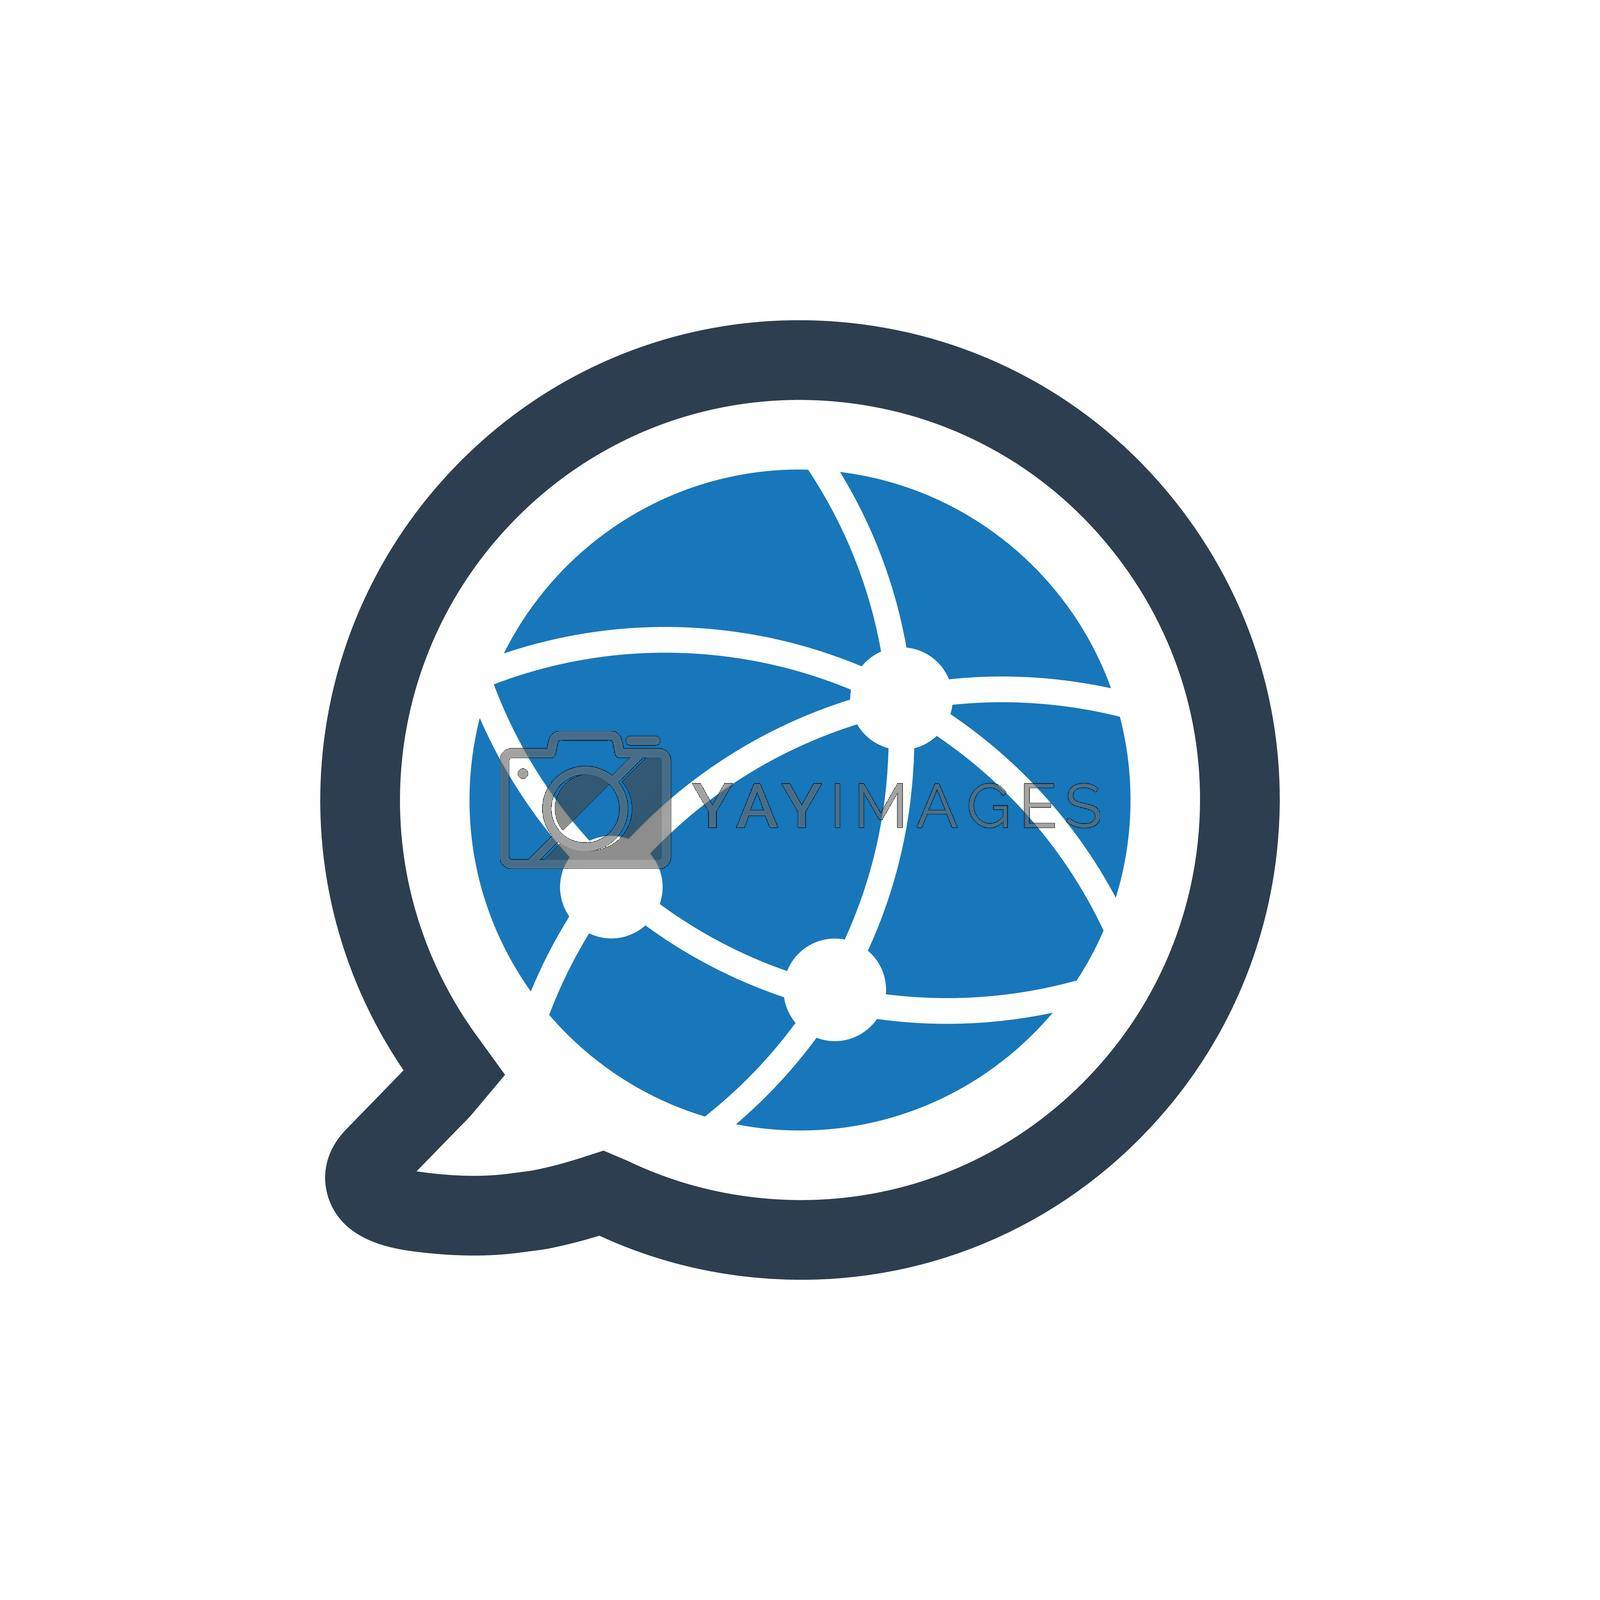 Global Communication / Communication icon. Meticulously designed vector EPS file.